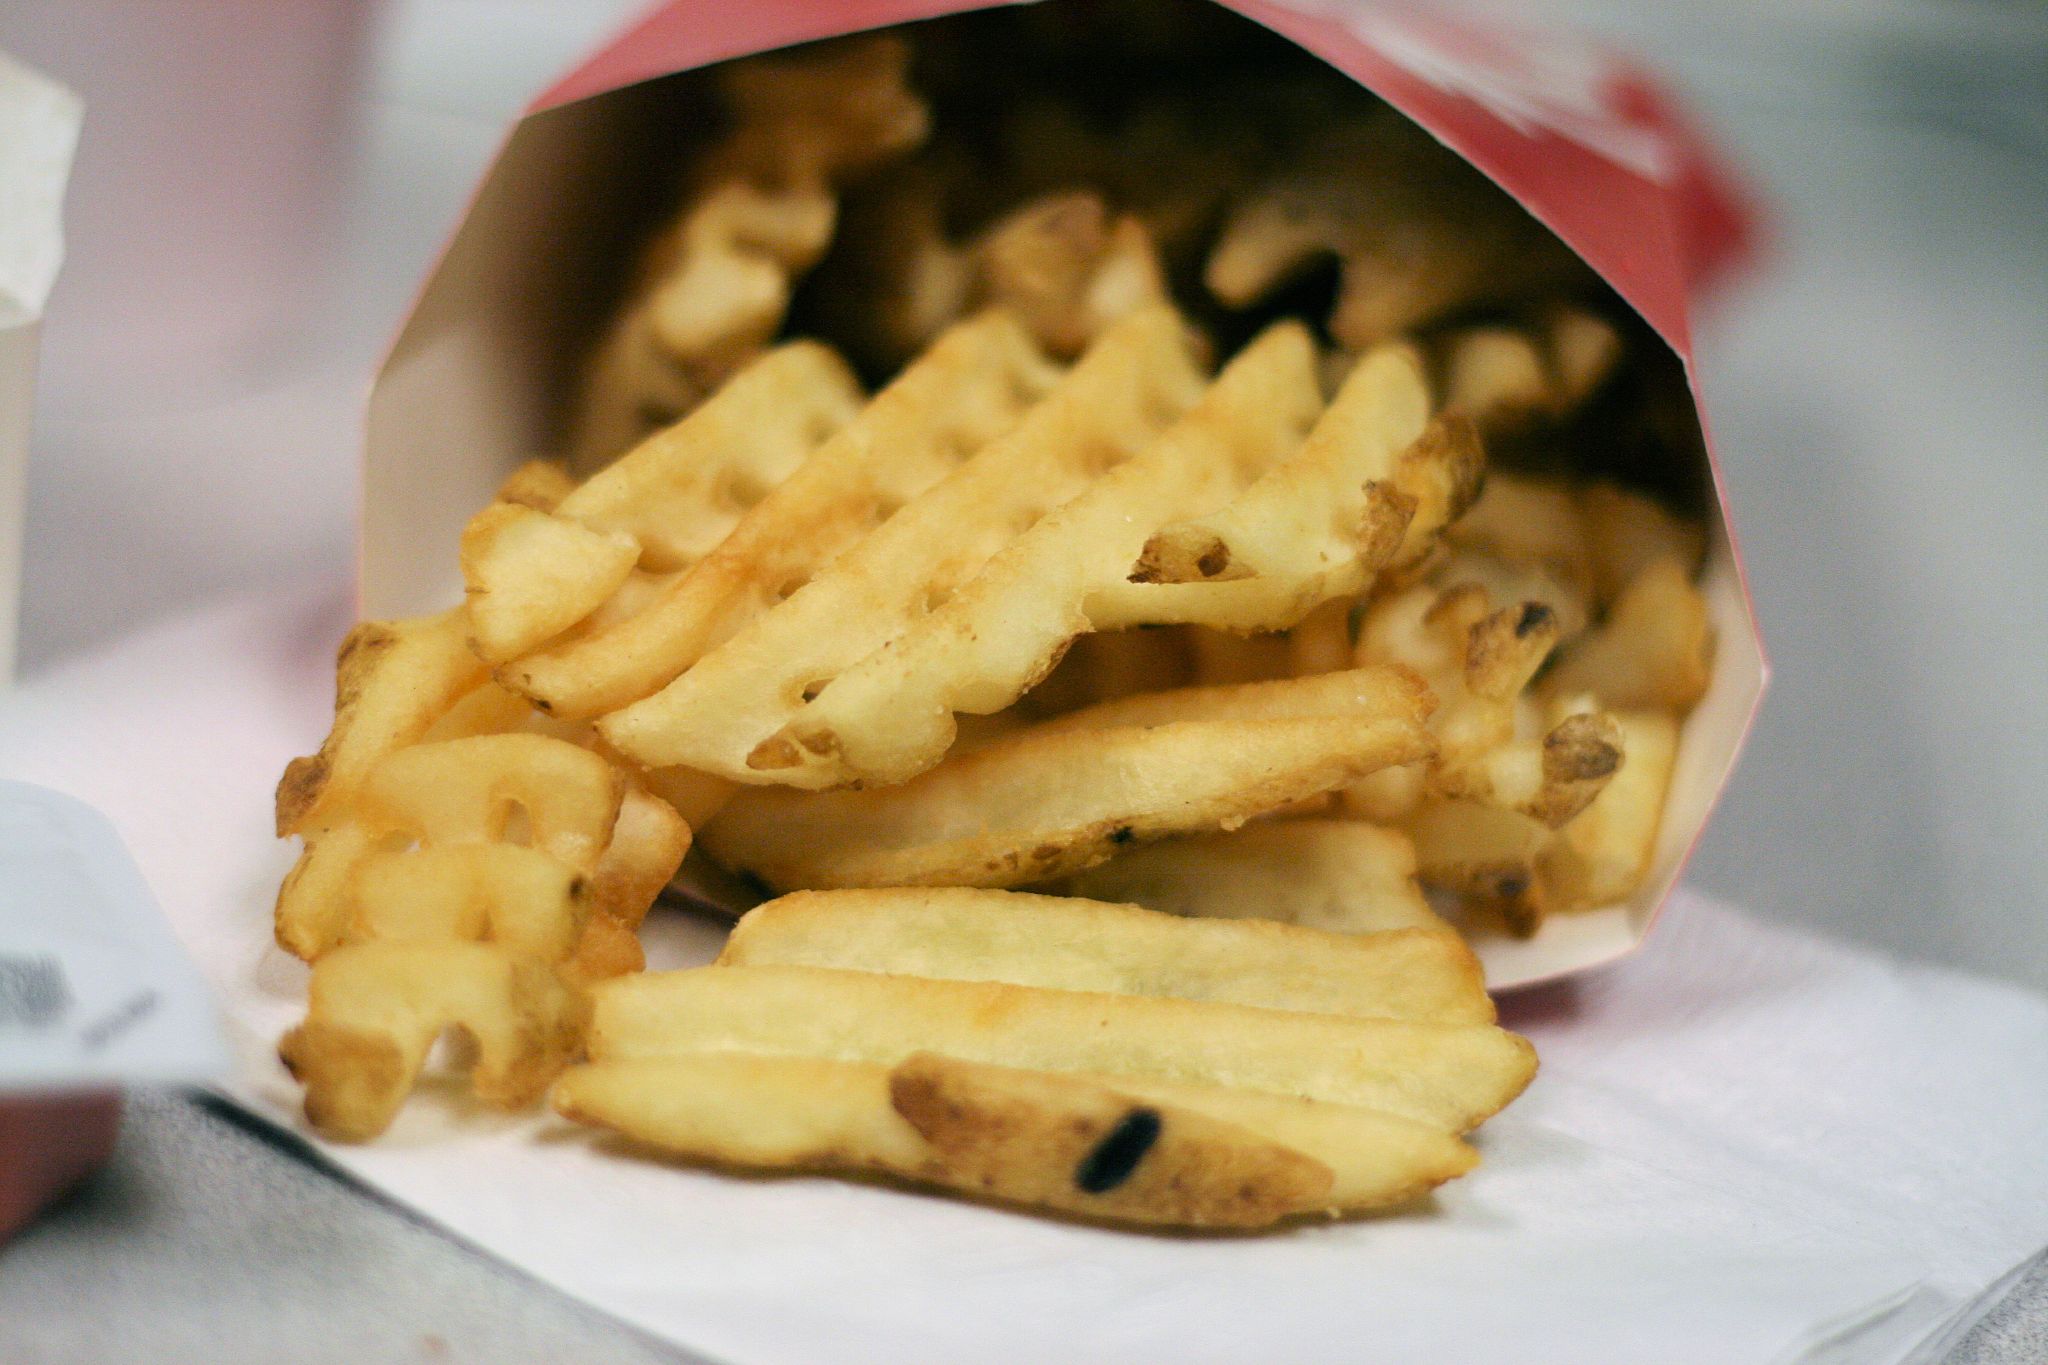 Chick-Fil-A fries are some of the best fast food fries in Rexburg.